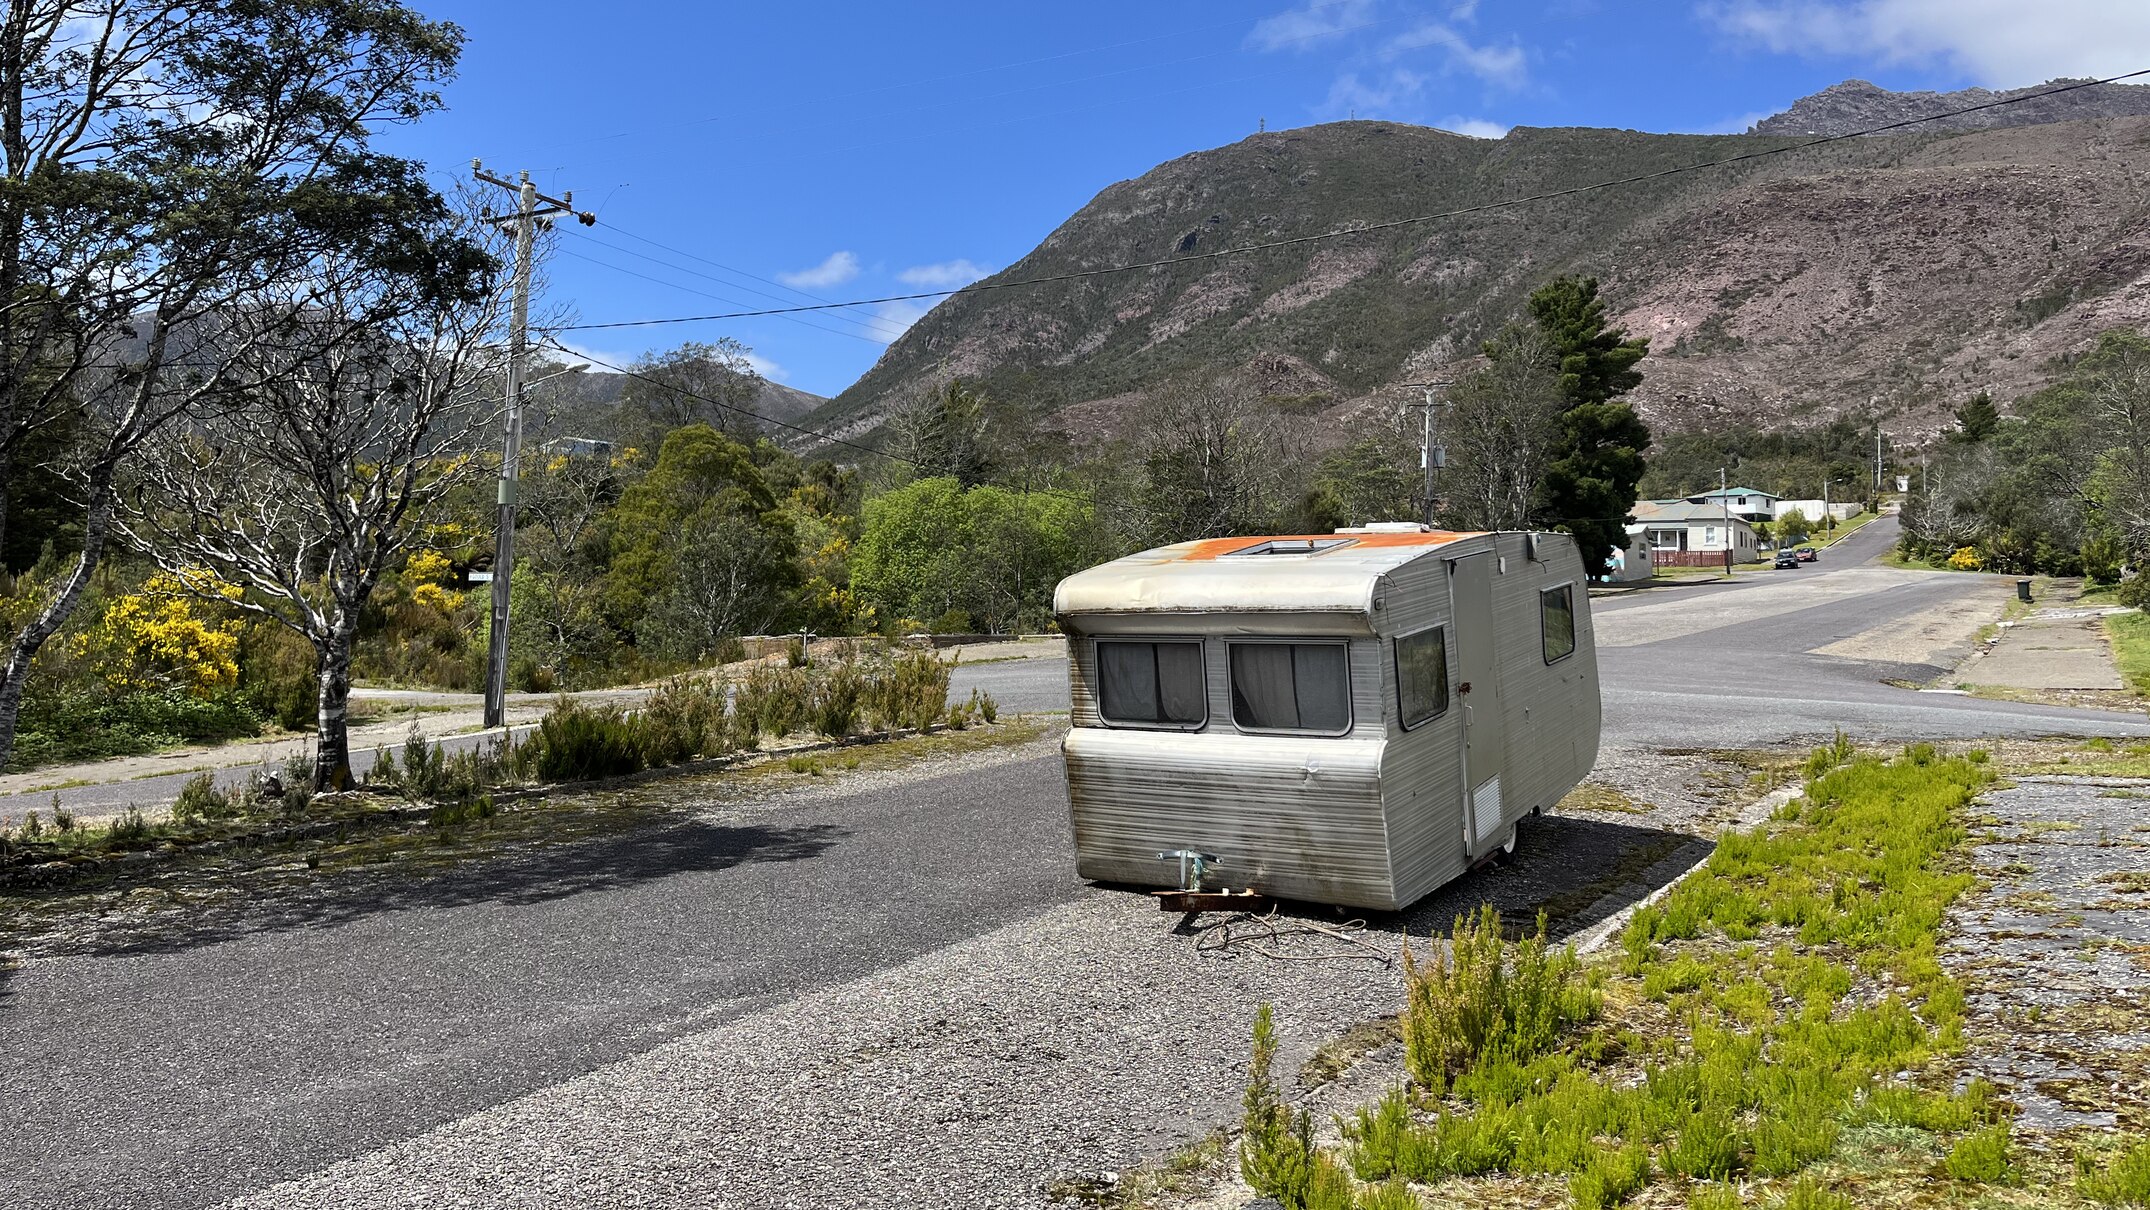 tasmania is riddled with hundreds of fading and vanishing towns. where did they go wrong?